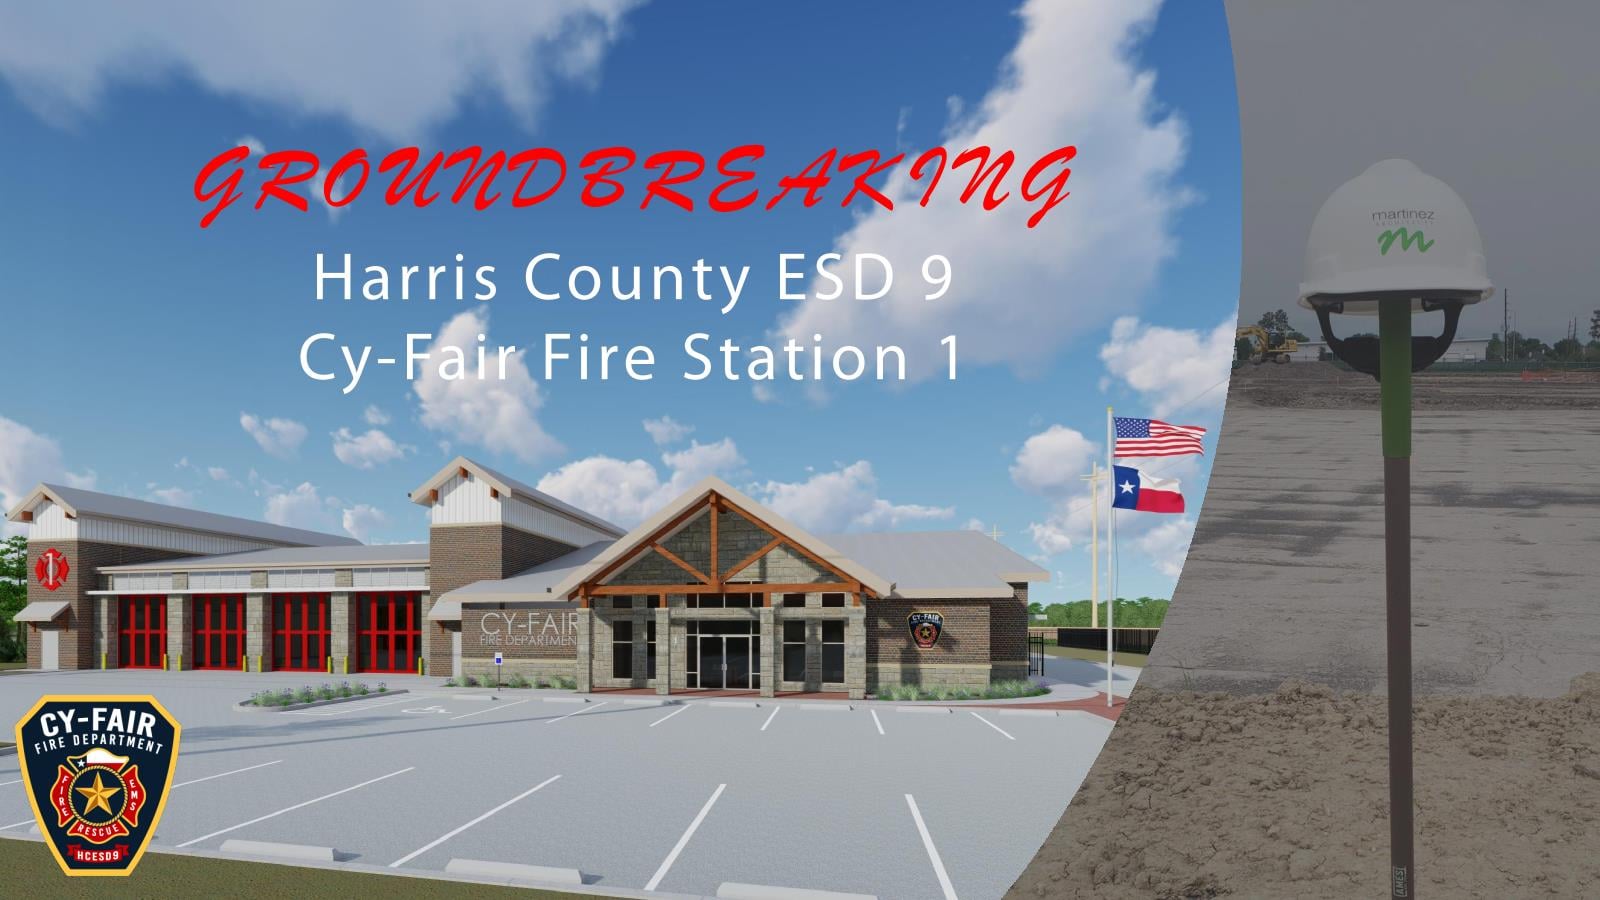 Cy-Fair Fire Station No. 1 Groundbreaking Event